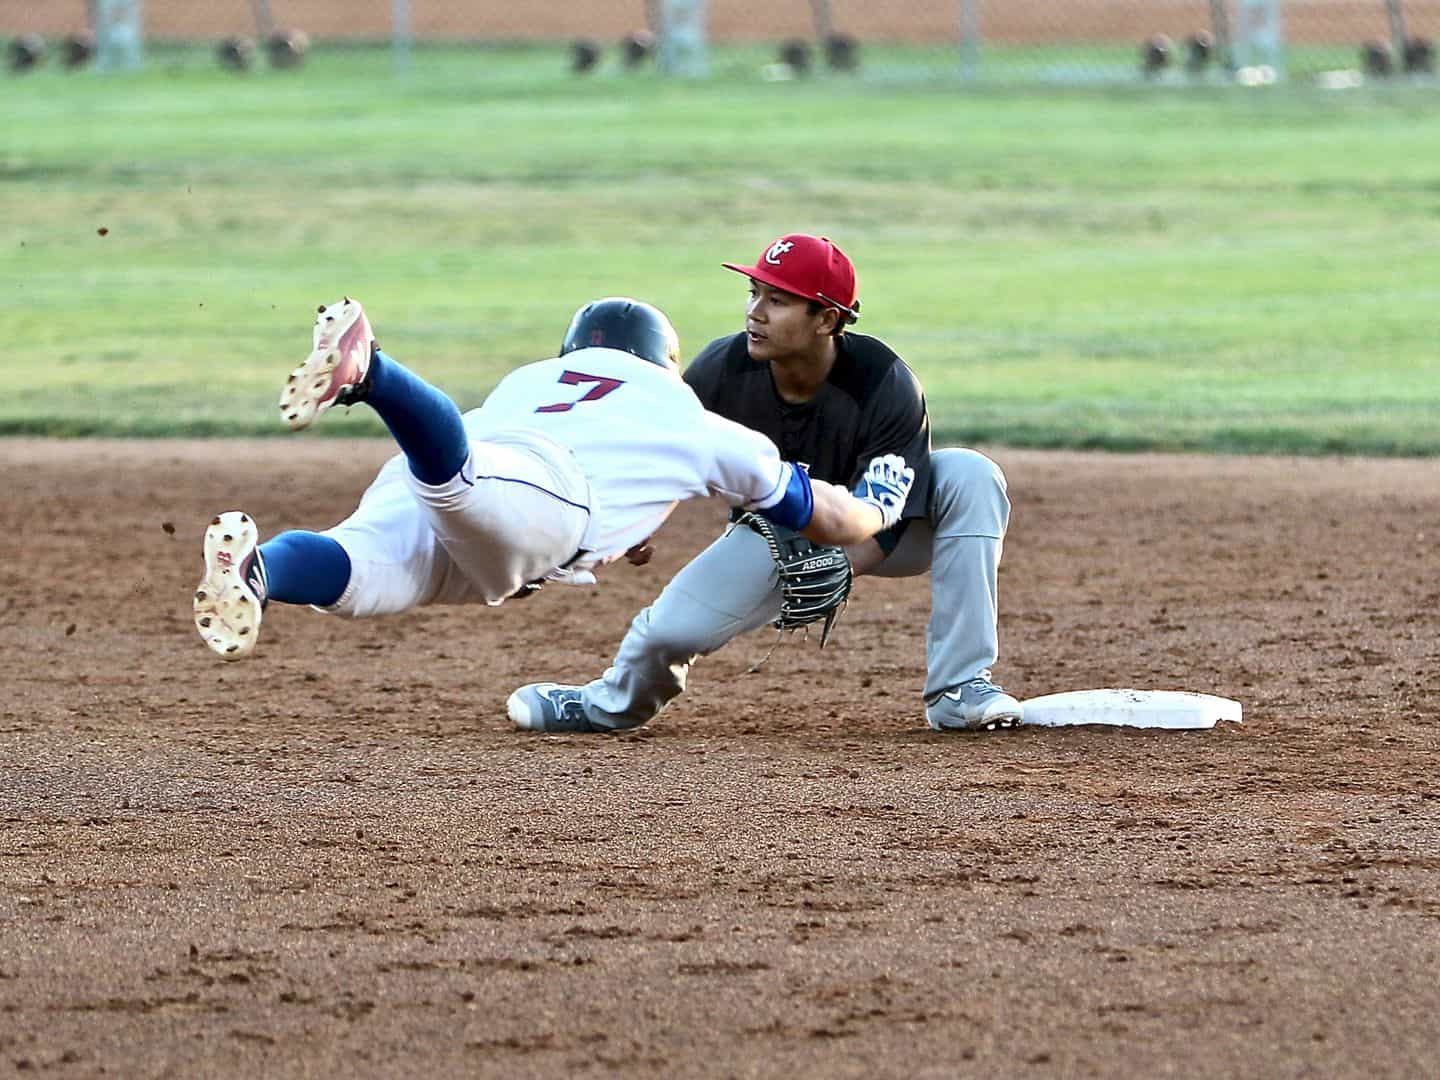 Player diving into base